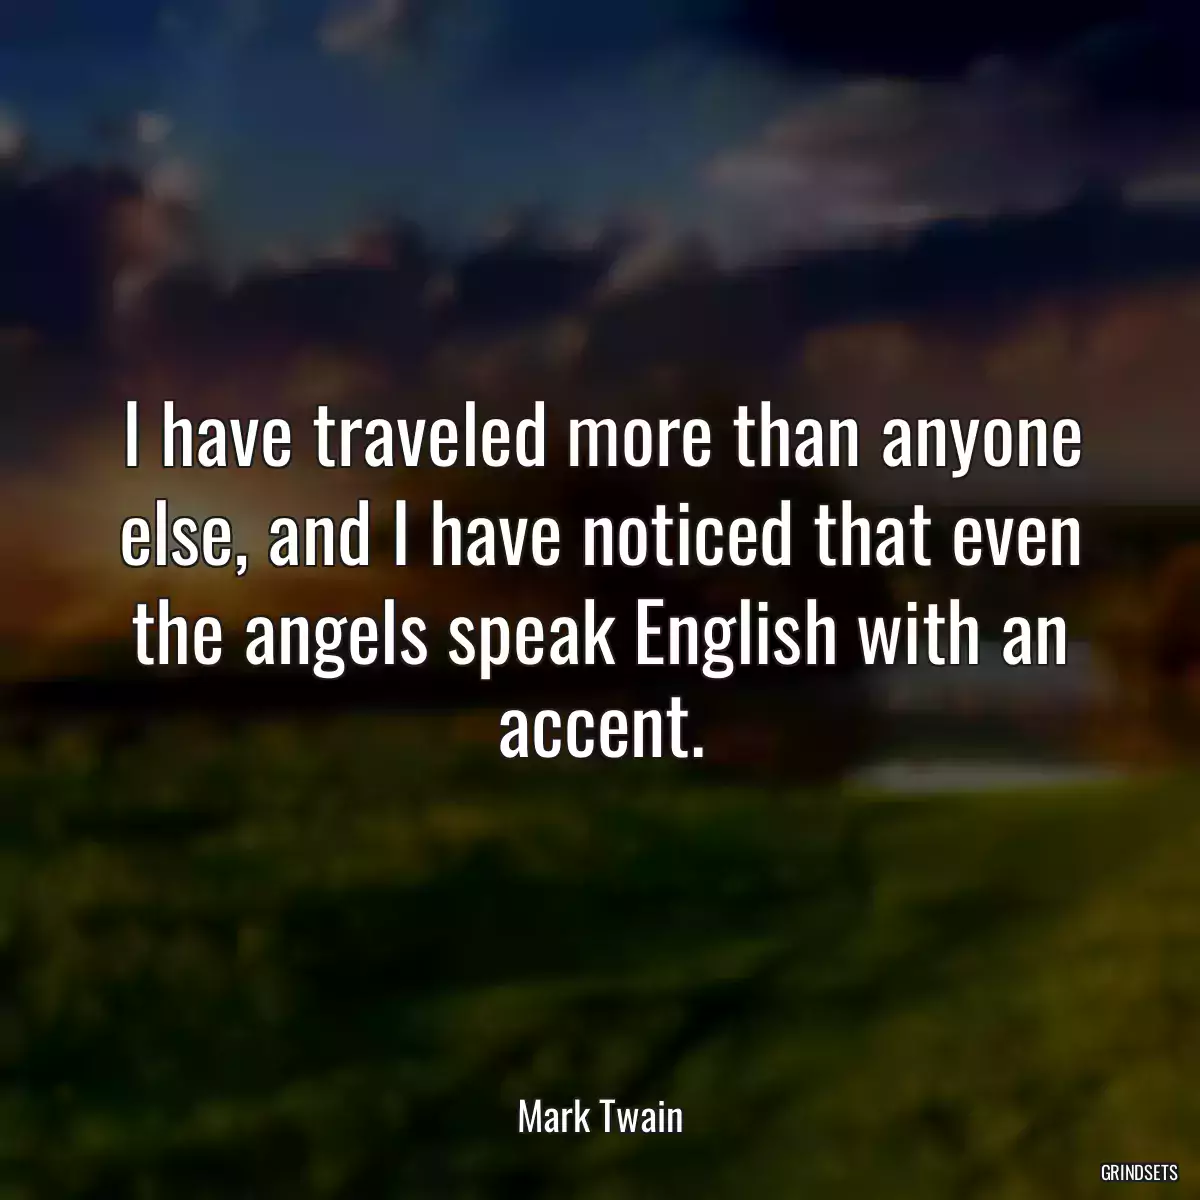 I have traveled more than anyone else, and I have noticed that even the angels speak English with an accent.